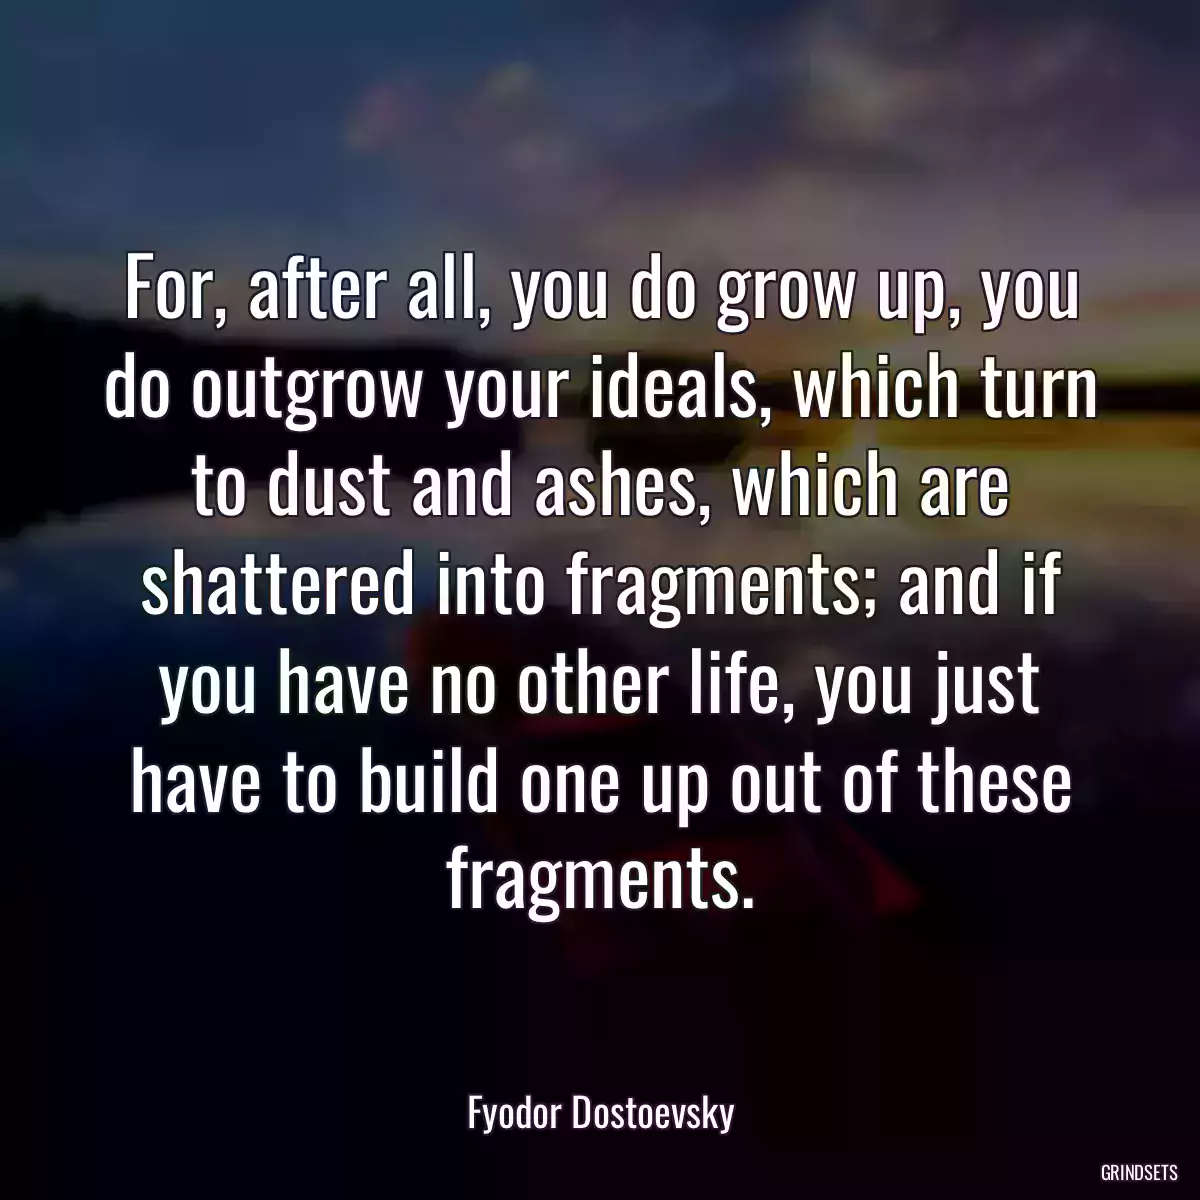 For, after all, you do grow up, you do outgrow your ideals, which turn to dust and ashes, which are shattered into fragments; and if you have no other life, you just have to build one up out of these fragments.